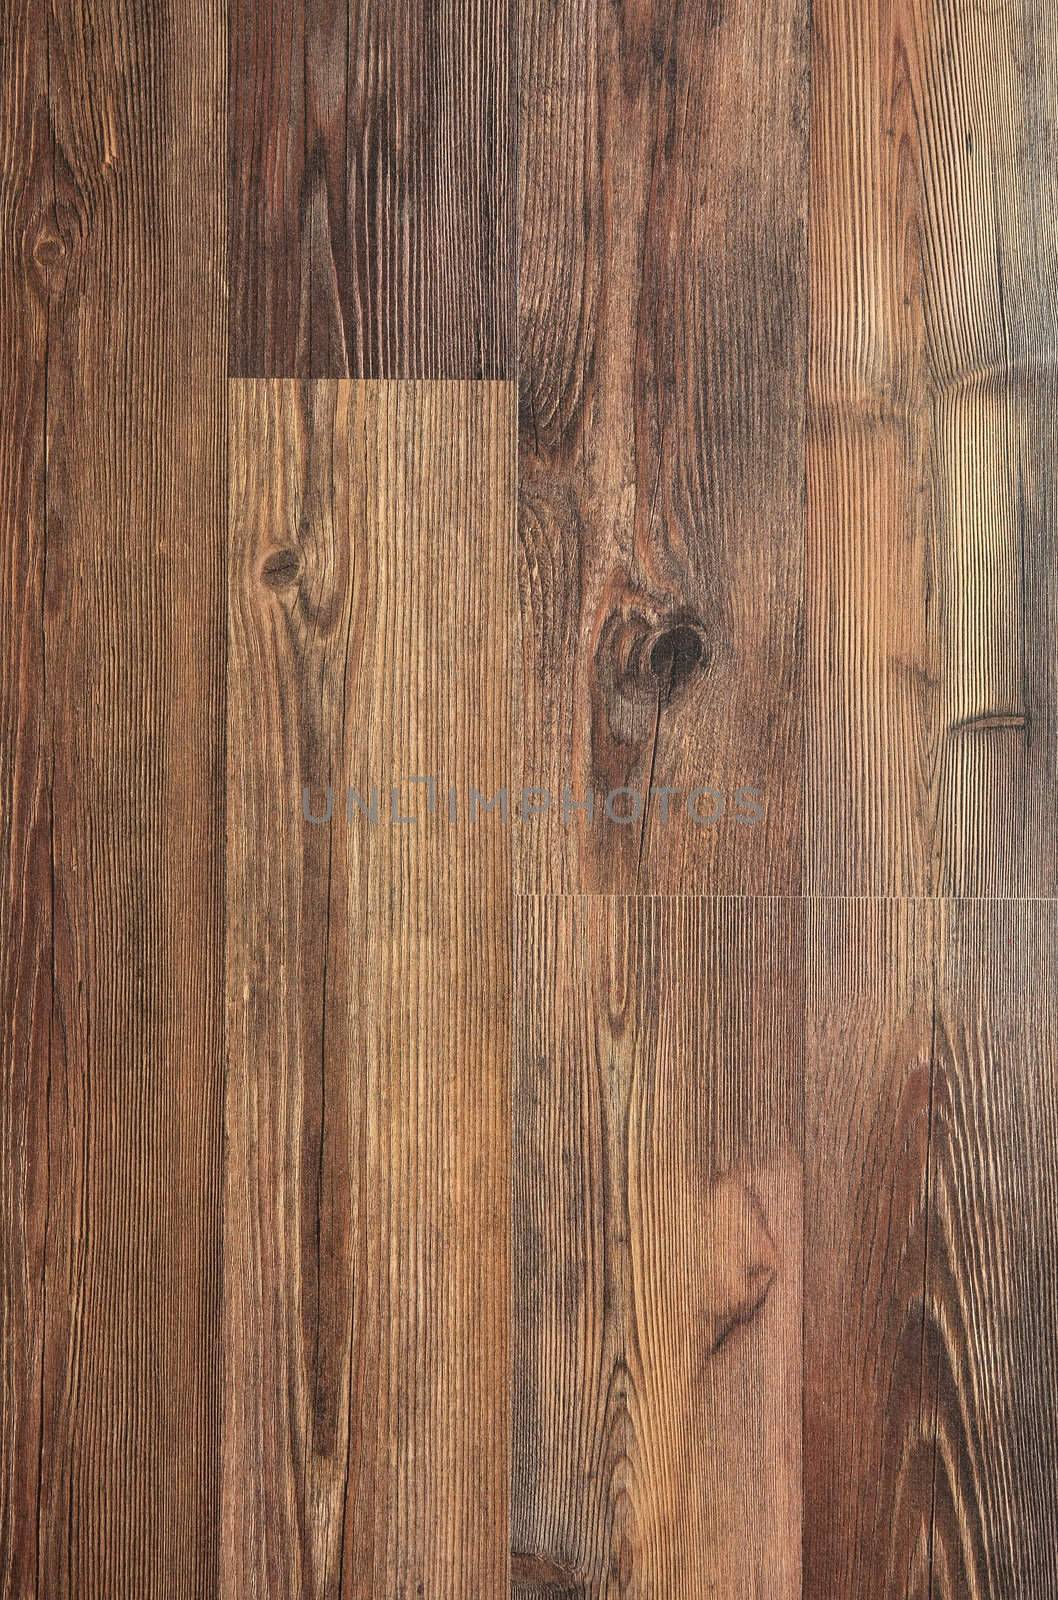 Details of Brown wood texture in closeup